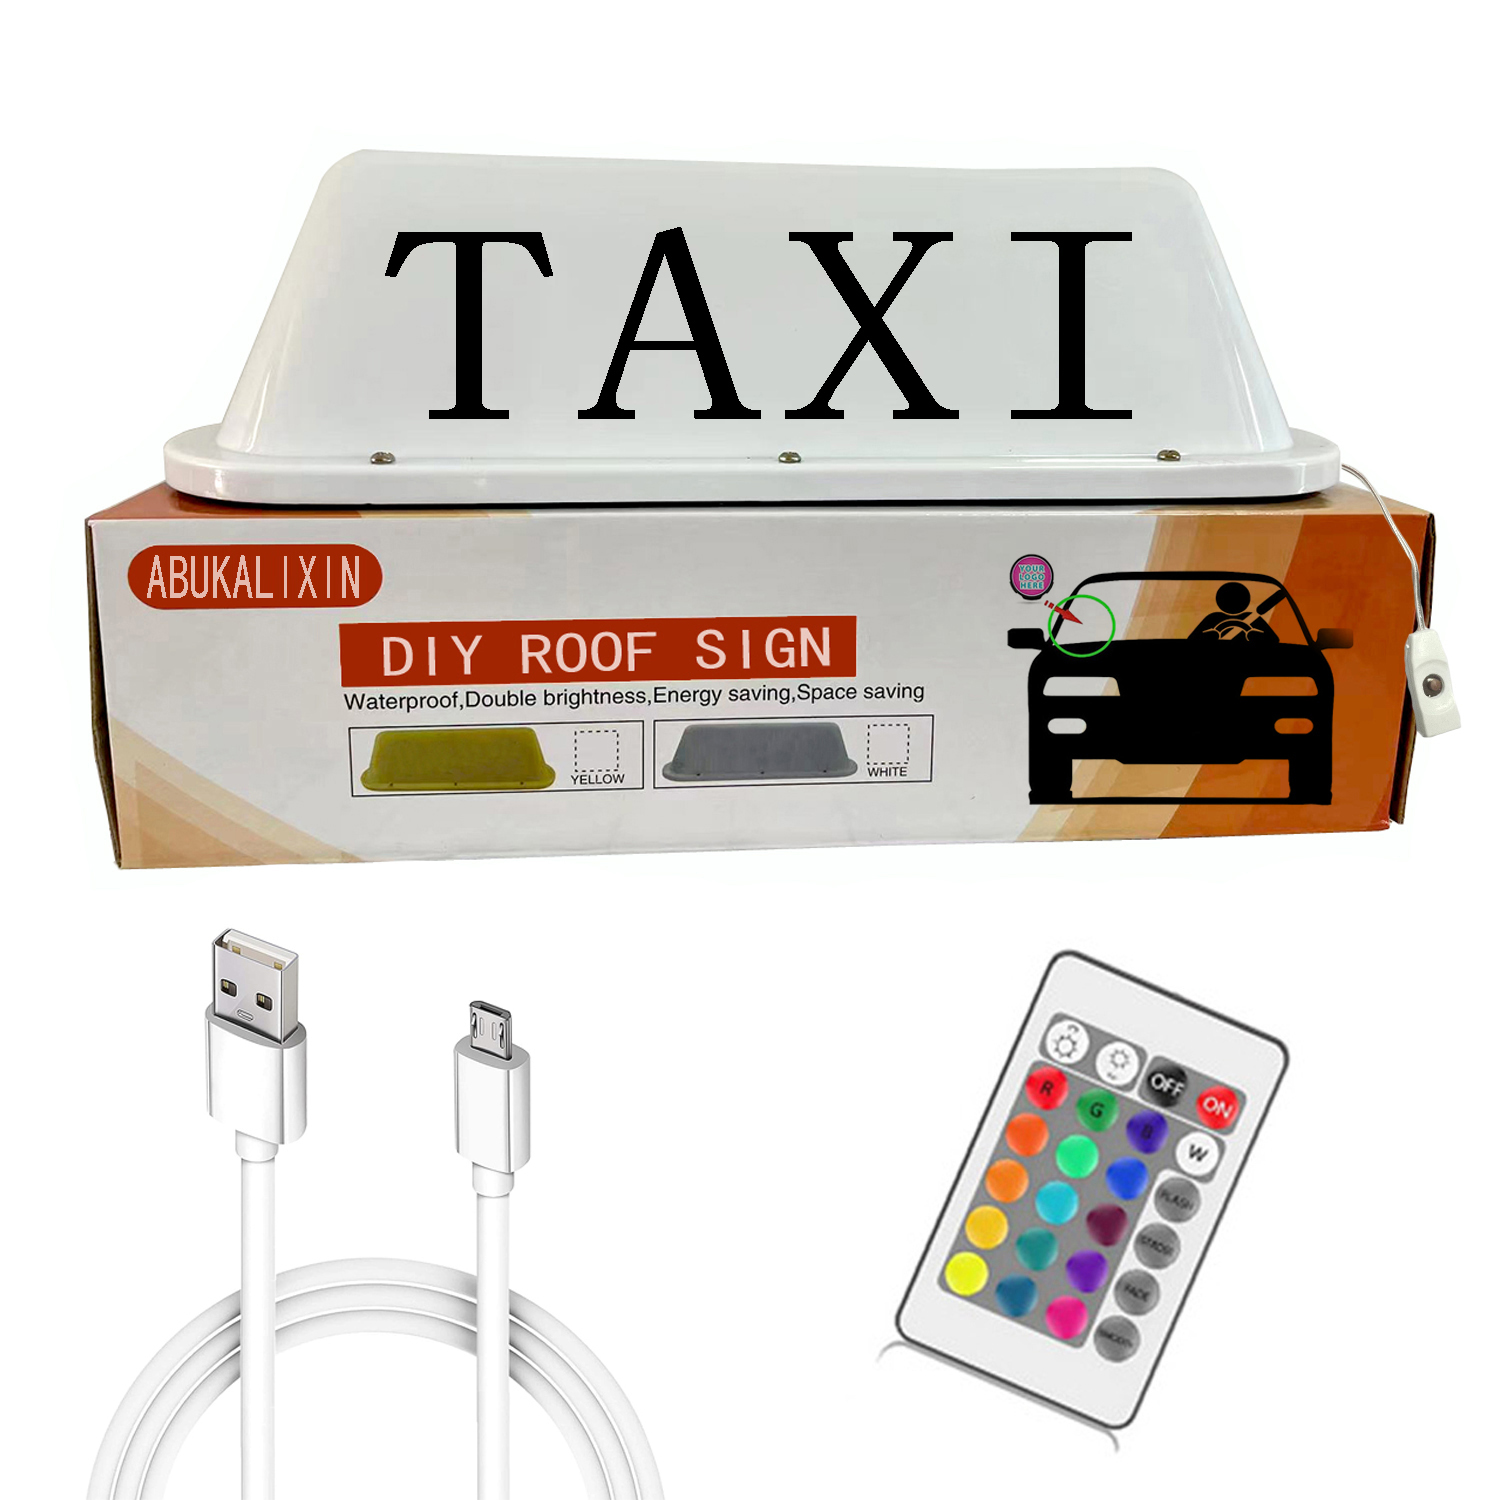 Taxi Sign Cab Top Light Roof Driver with USB Rechargeable Battery Magnetic Base Waterproof 24 Key IR Remote Controller Colorful Light White Shell